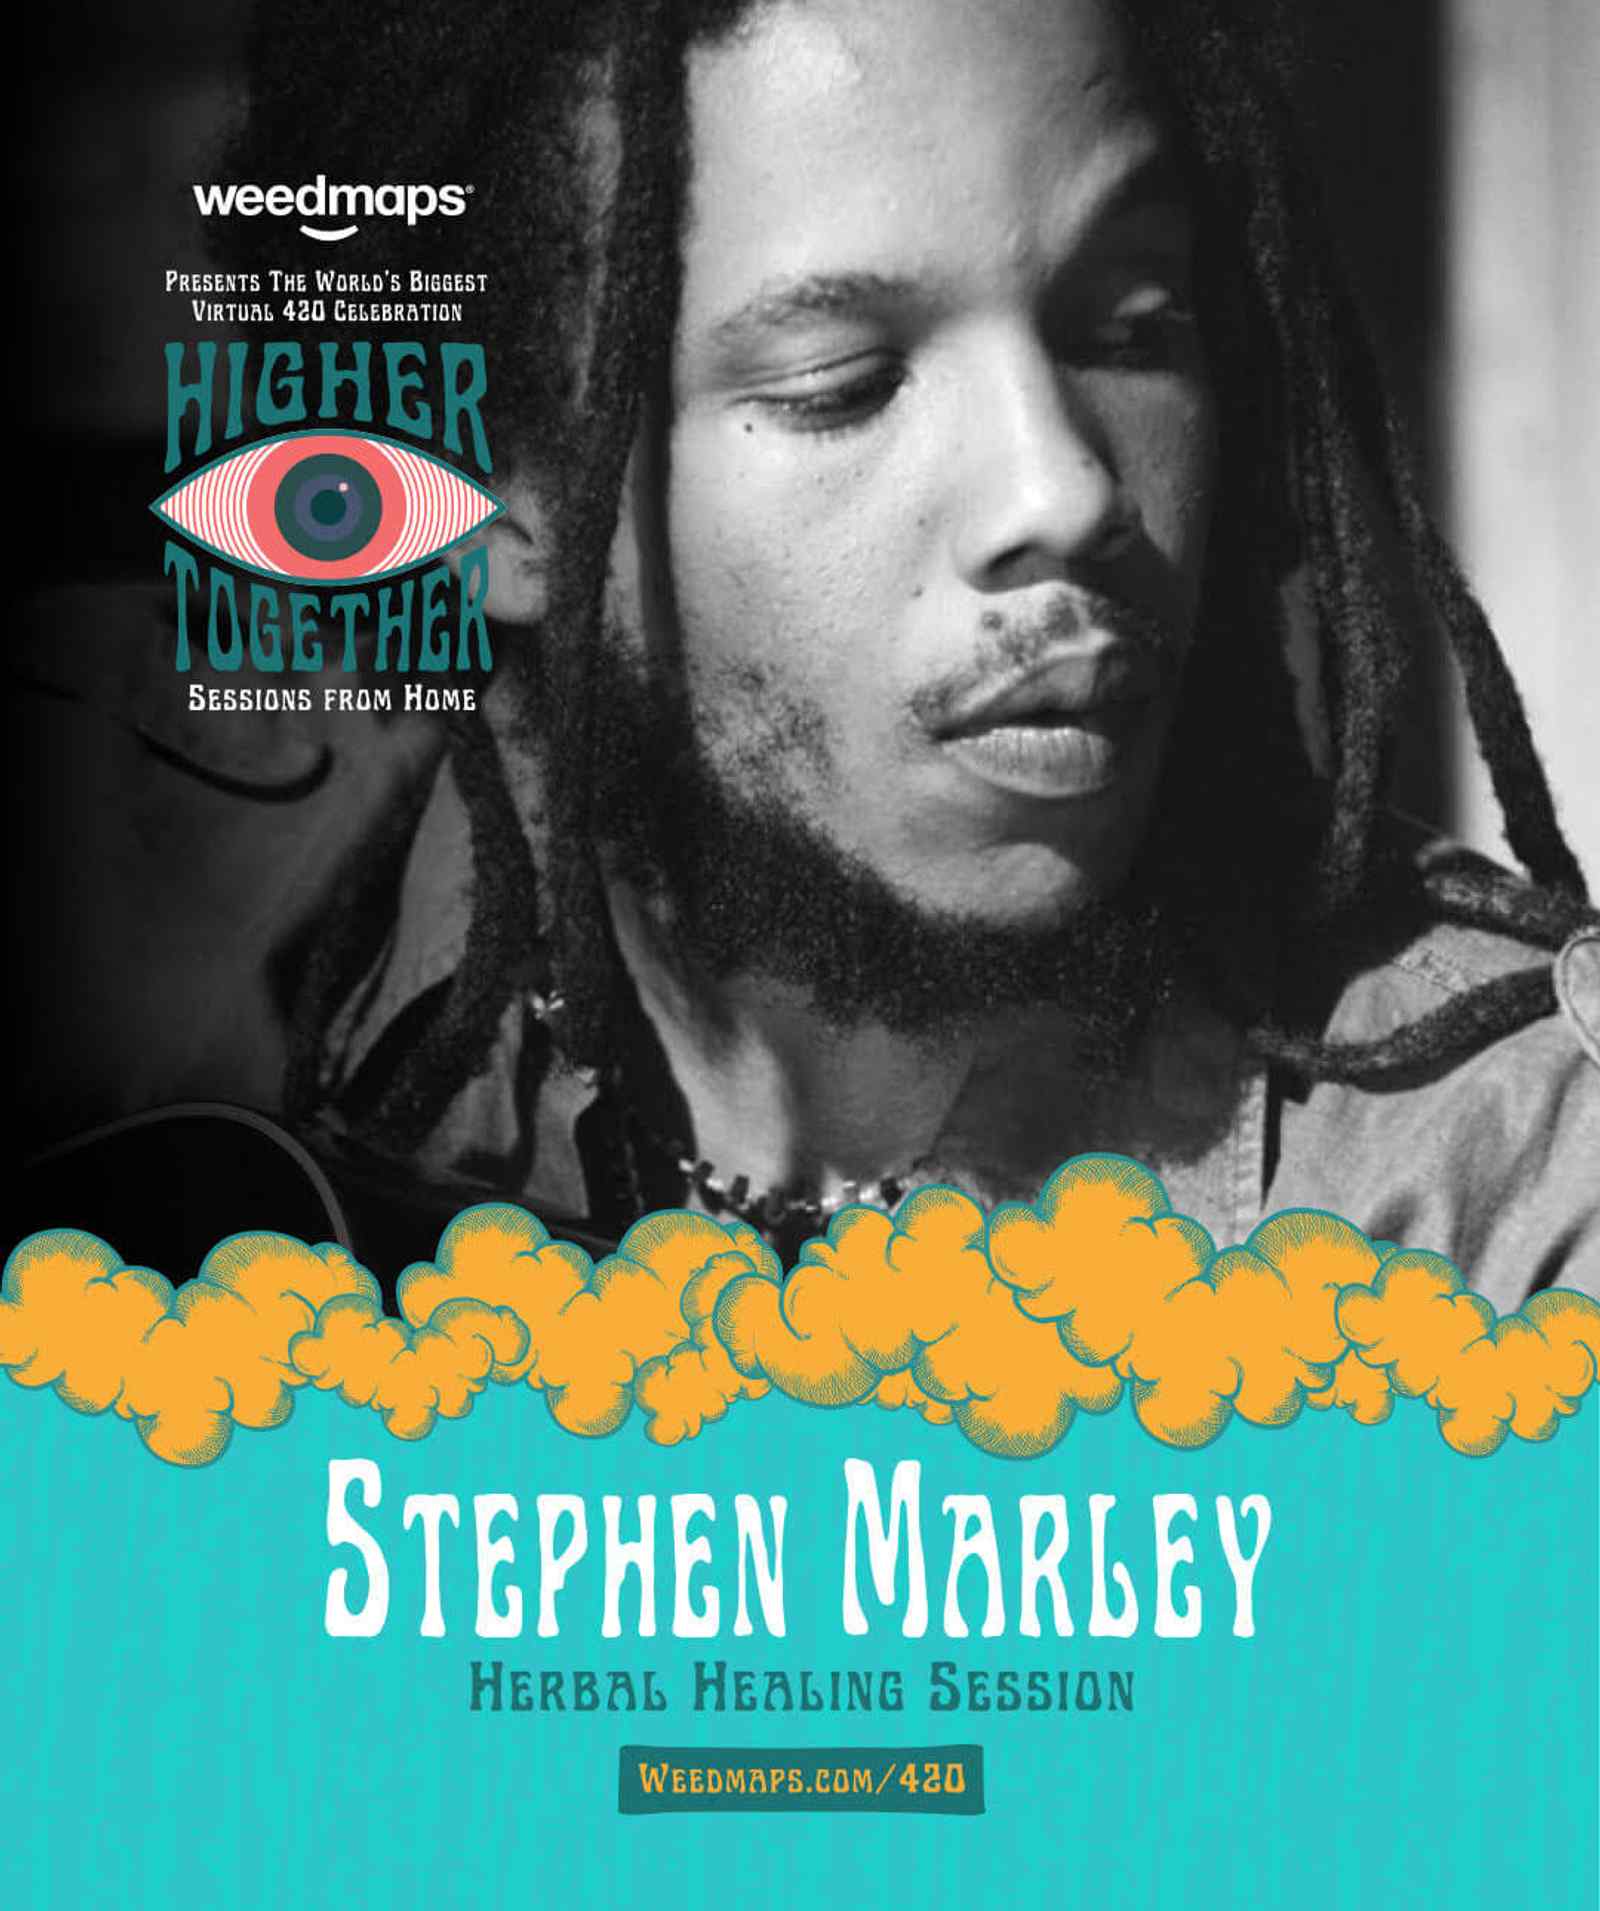 Herbal Healing Session with Stephen Marley on 4.20